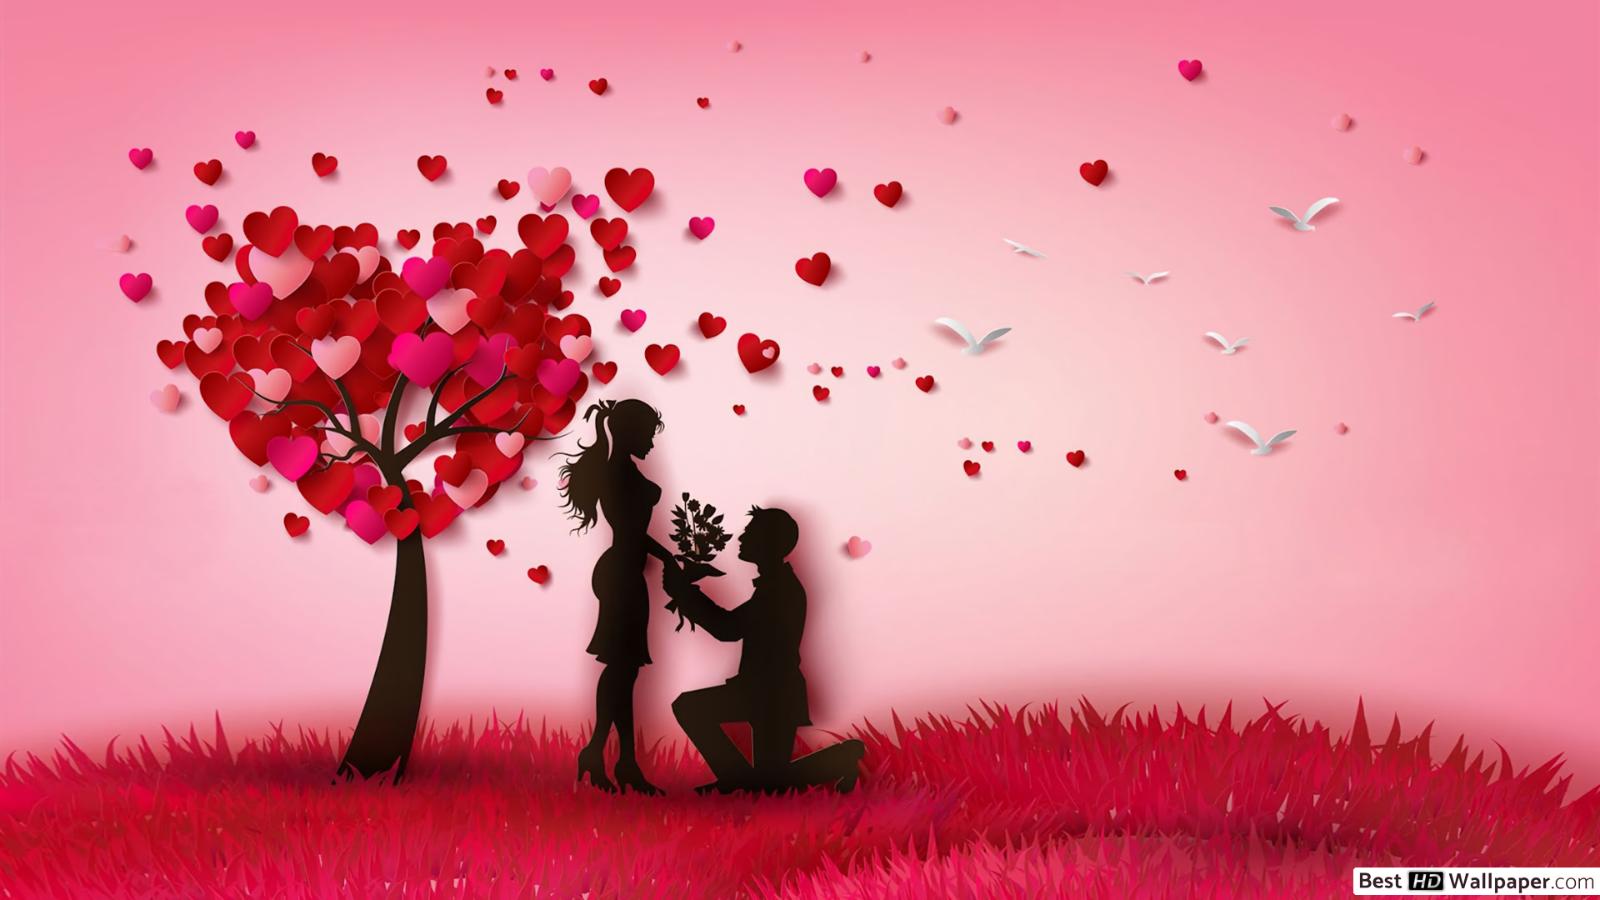 Artistic heart tree and a couple HD wallpaper download